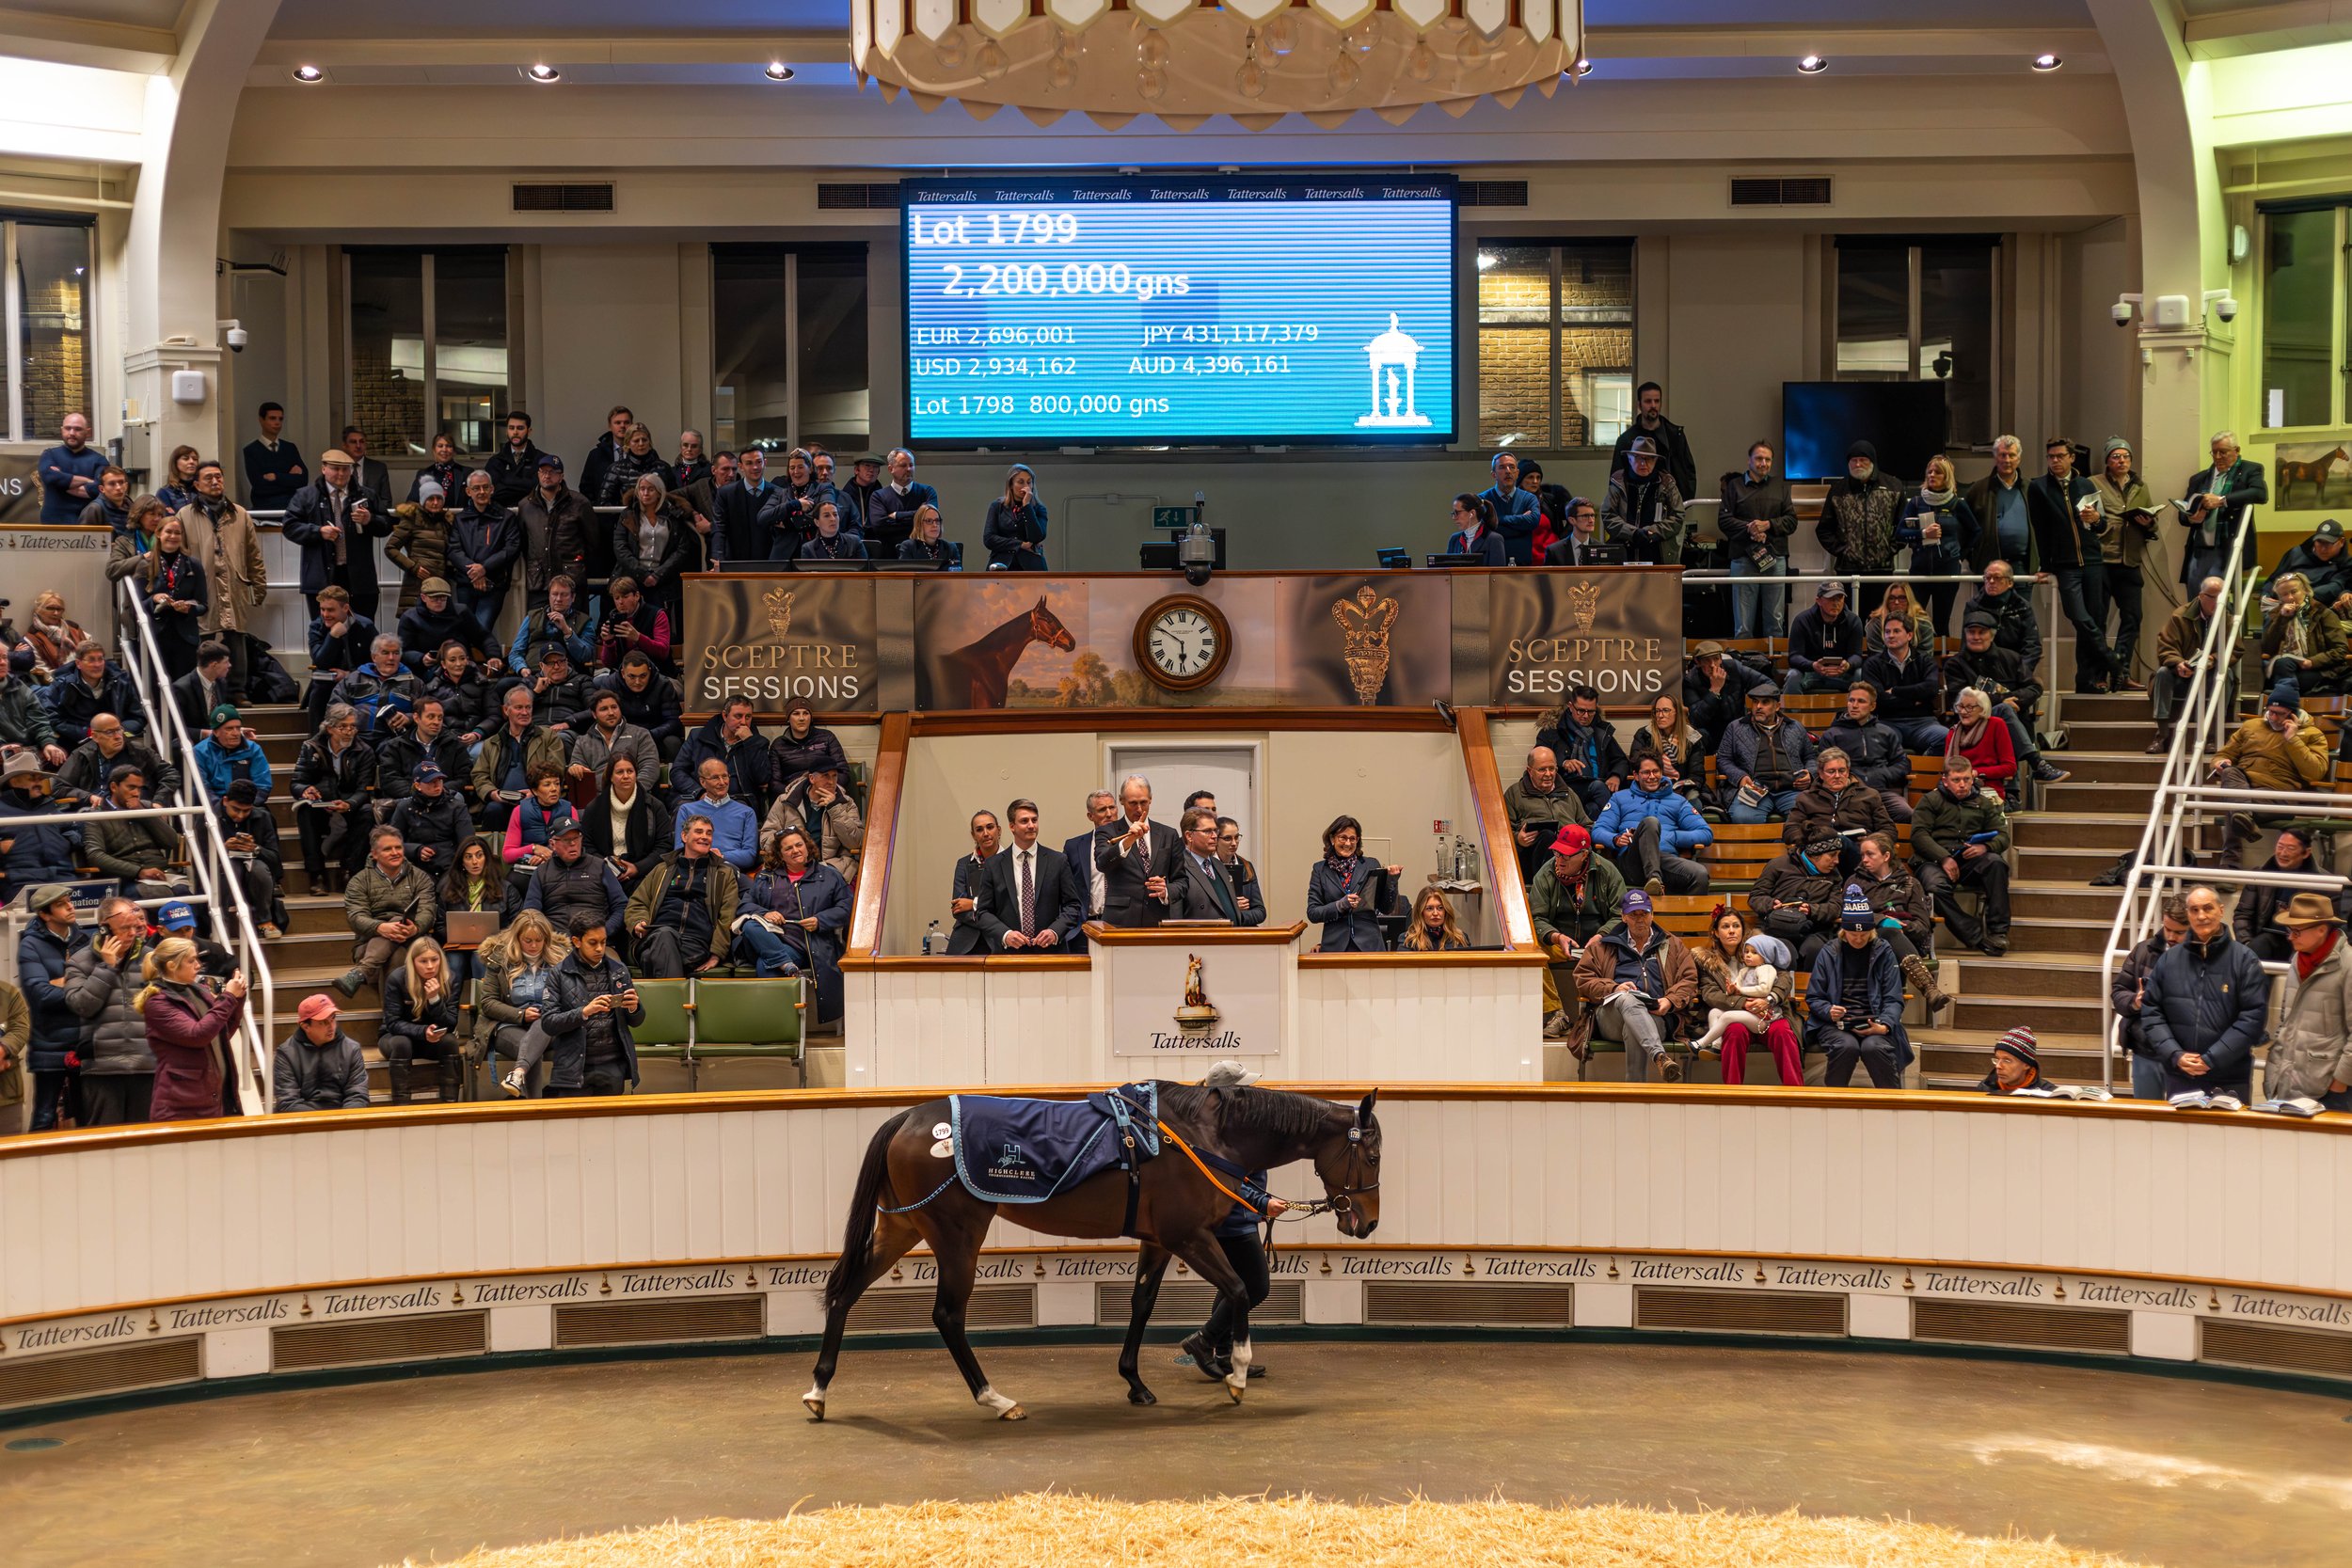 Cachet sells for 2,200,000gns